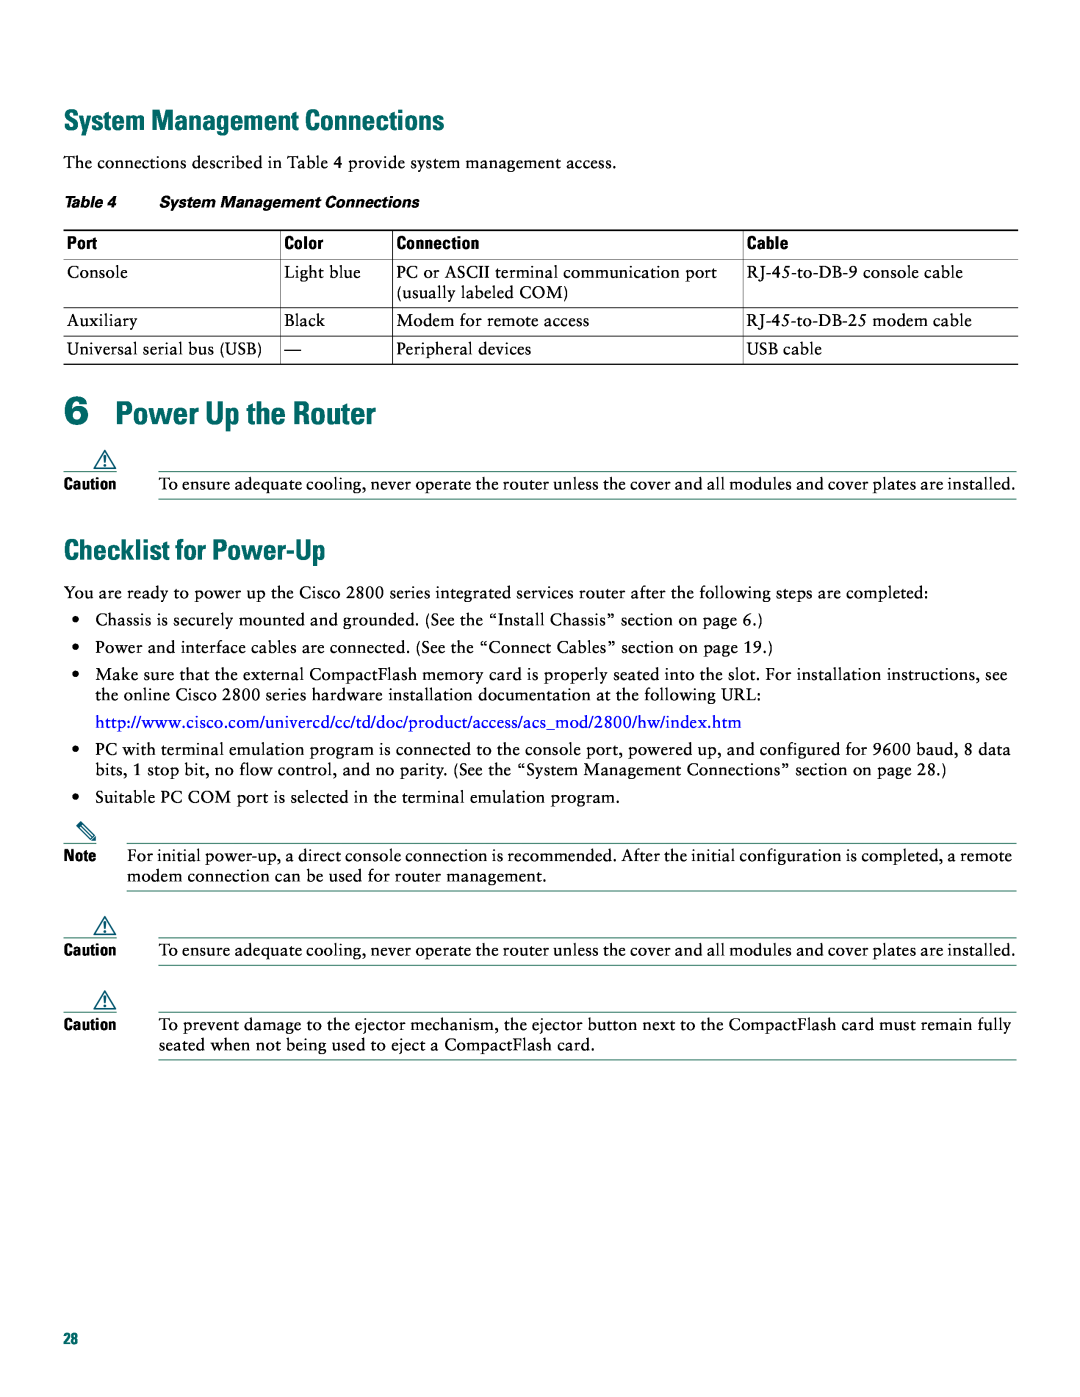 Cisco Systems 2800 manual Power Up the Router, System Management Connections, Checklist for Power-Up 